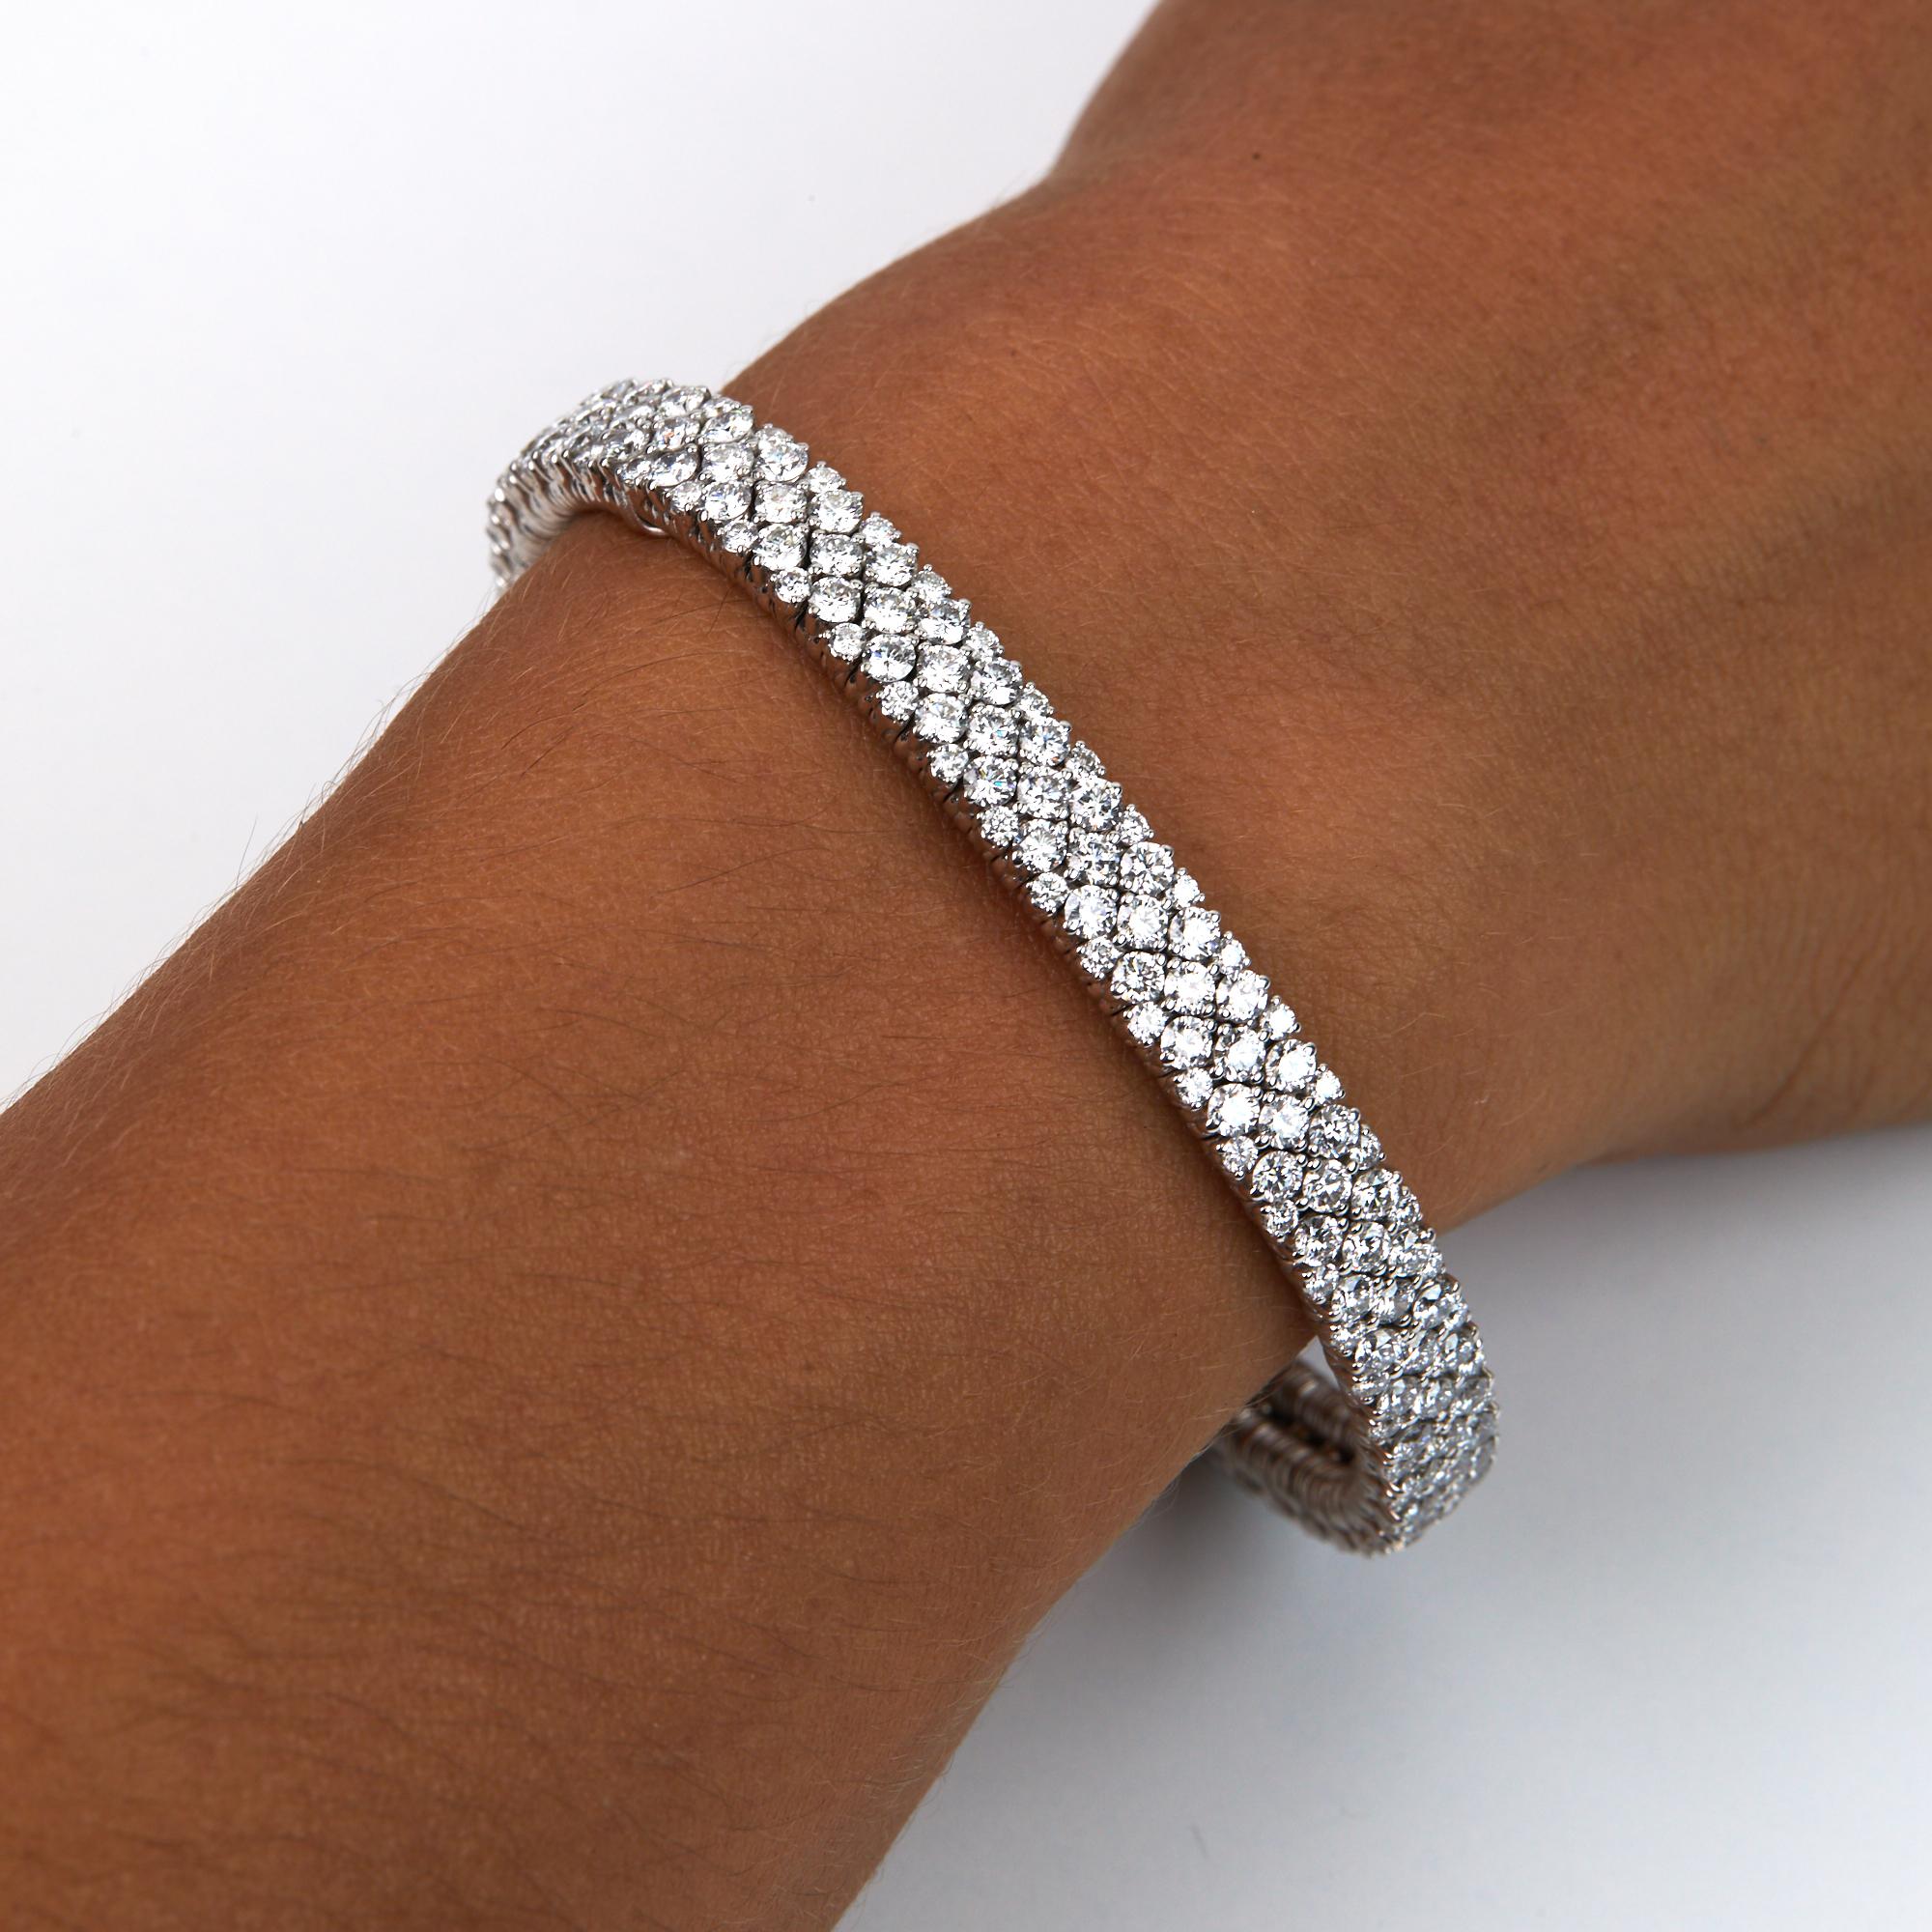 Stretch Diamond Bangle Bracelet with 8.88 carats of brilliant round cut diamonds, all F-G color and VS clarity.  This amazing and fashionable modern bracelet is hand made in Italy using trademarked technology.  We use medical grade stainless steel